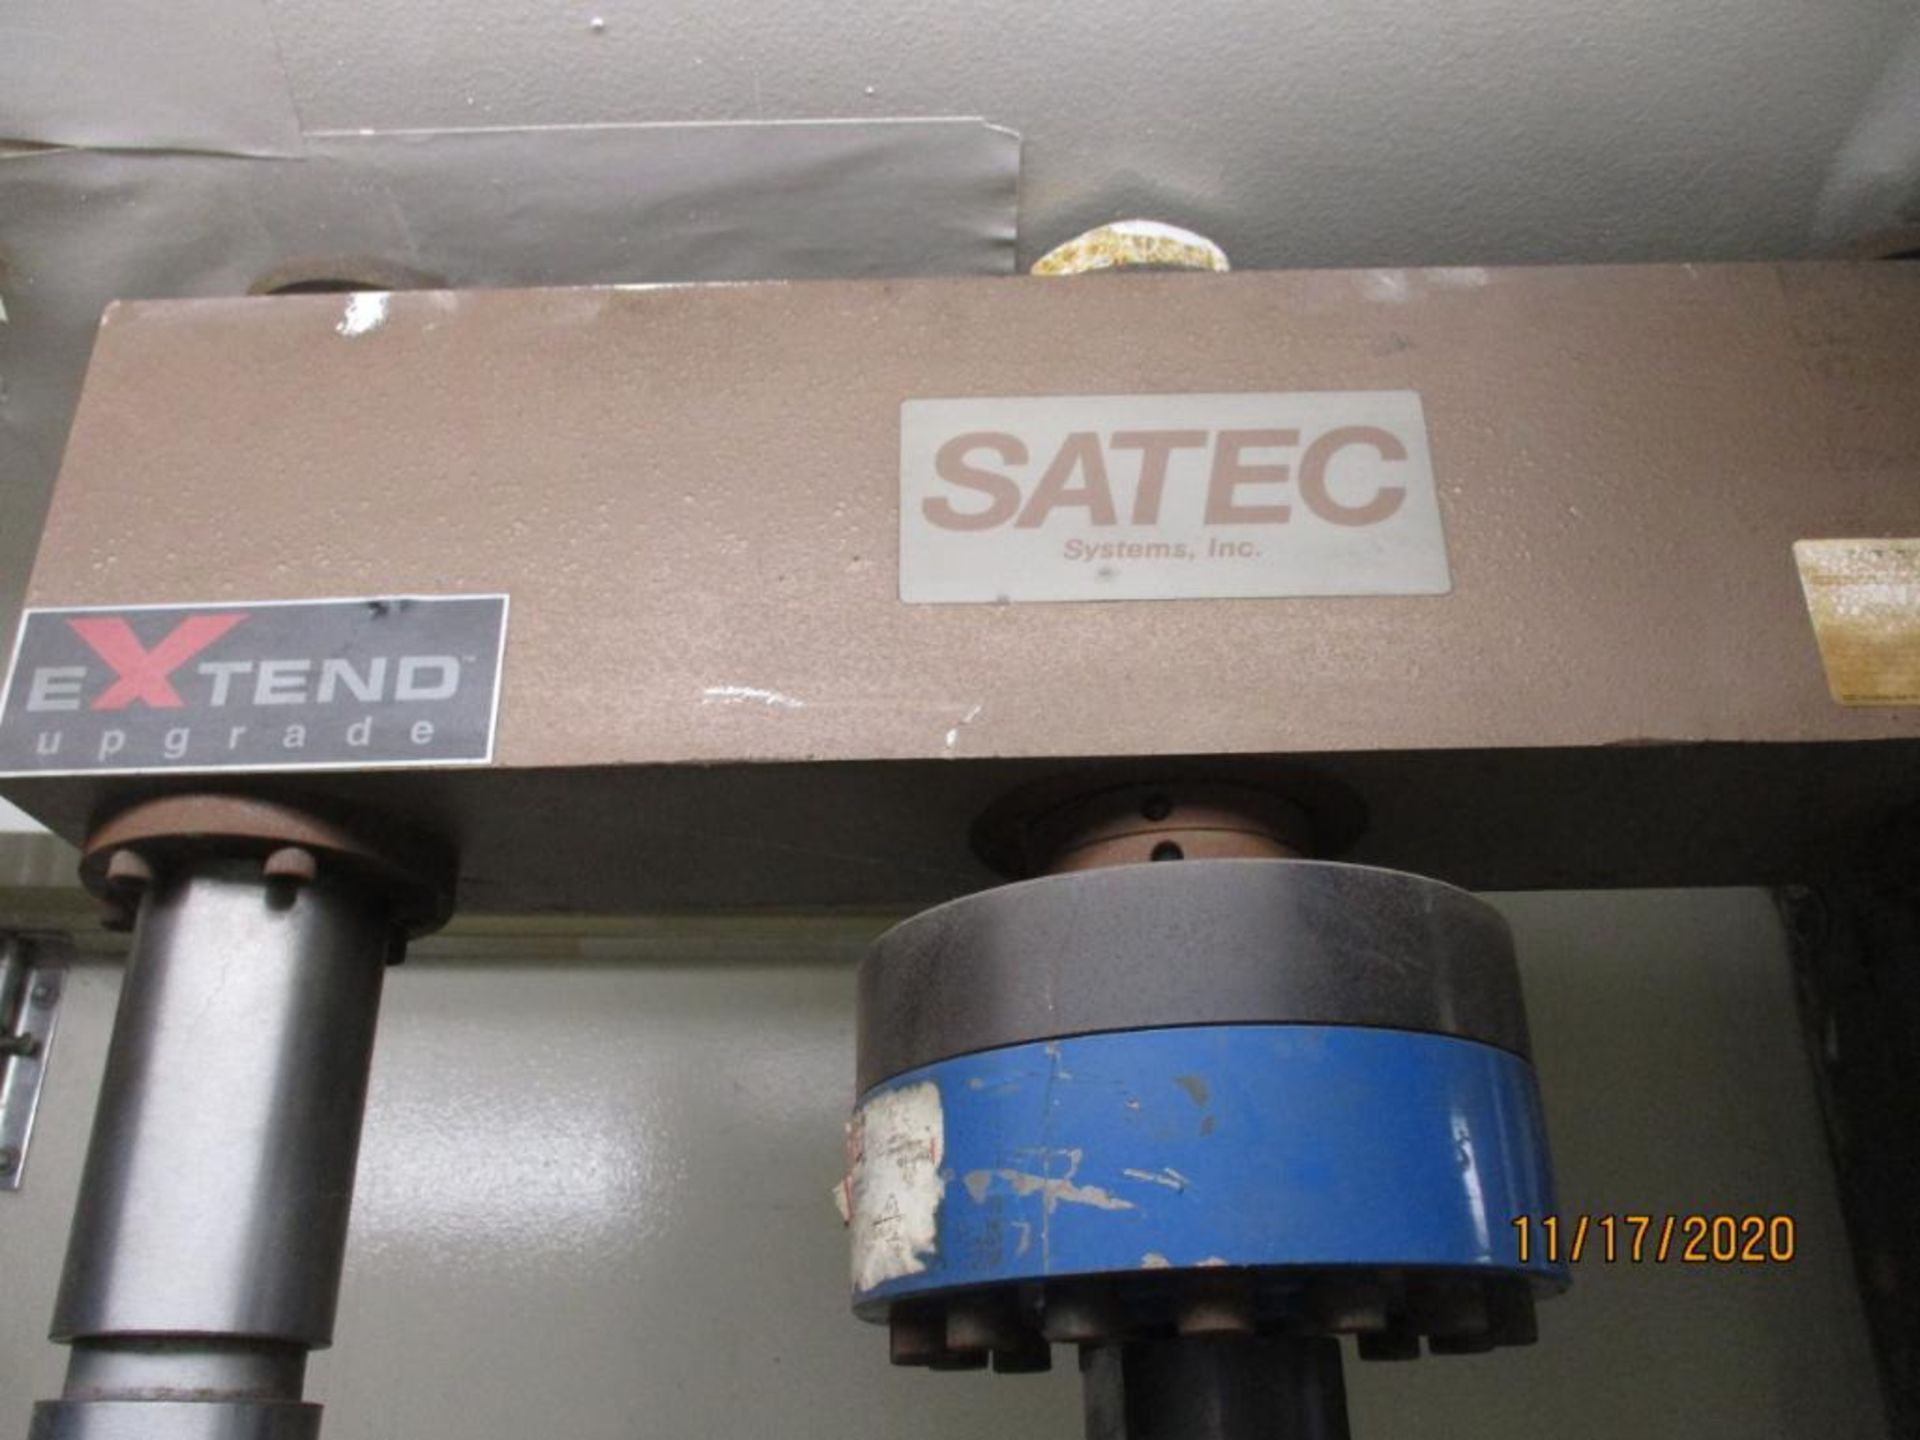 Satec Systems Extend Upgrade Tensile Tester (LOCATED IN COLUMBIANA, AL)